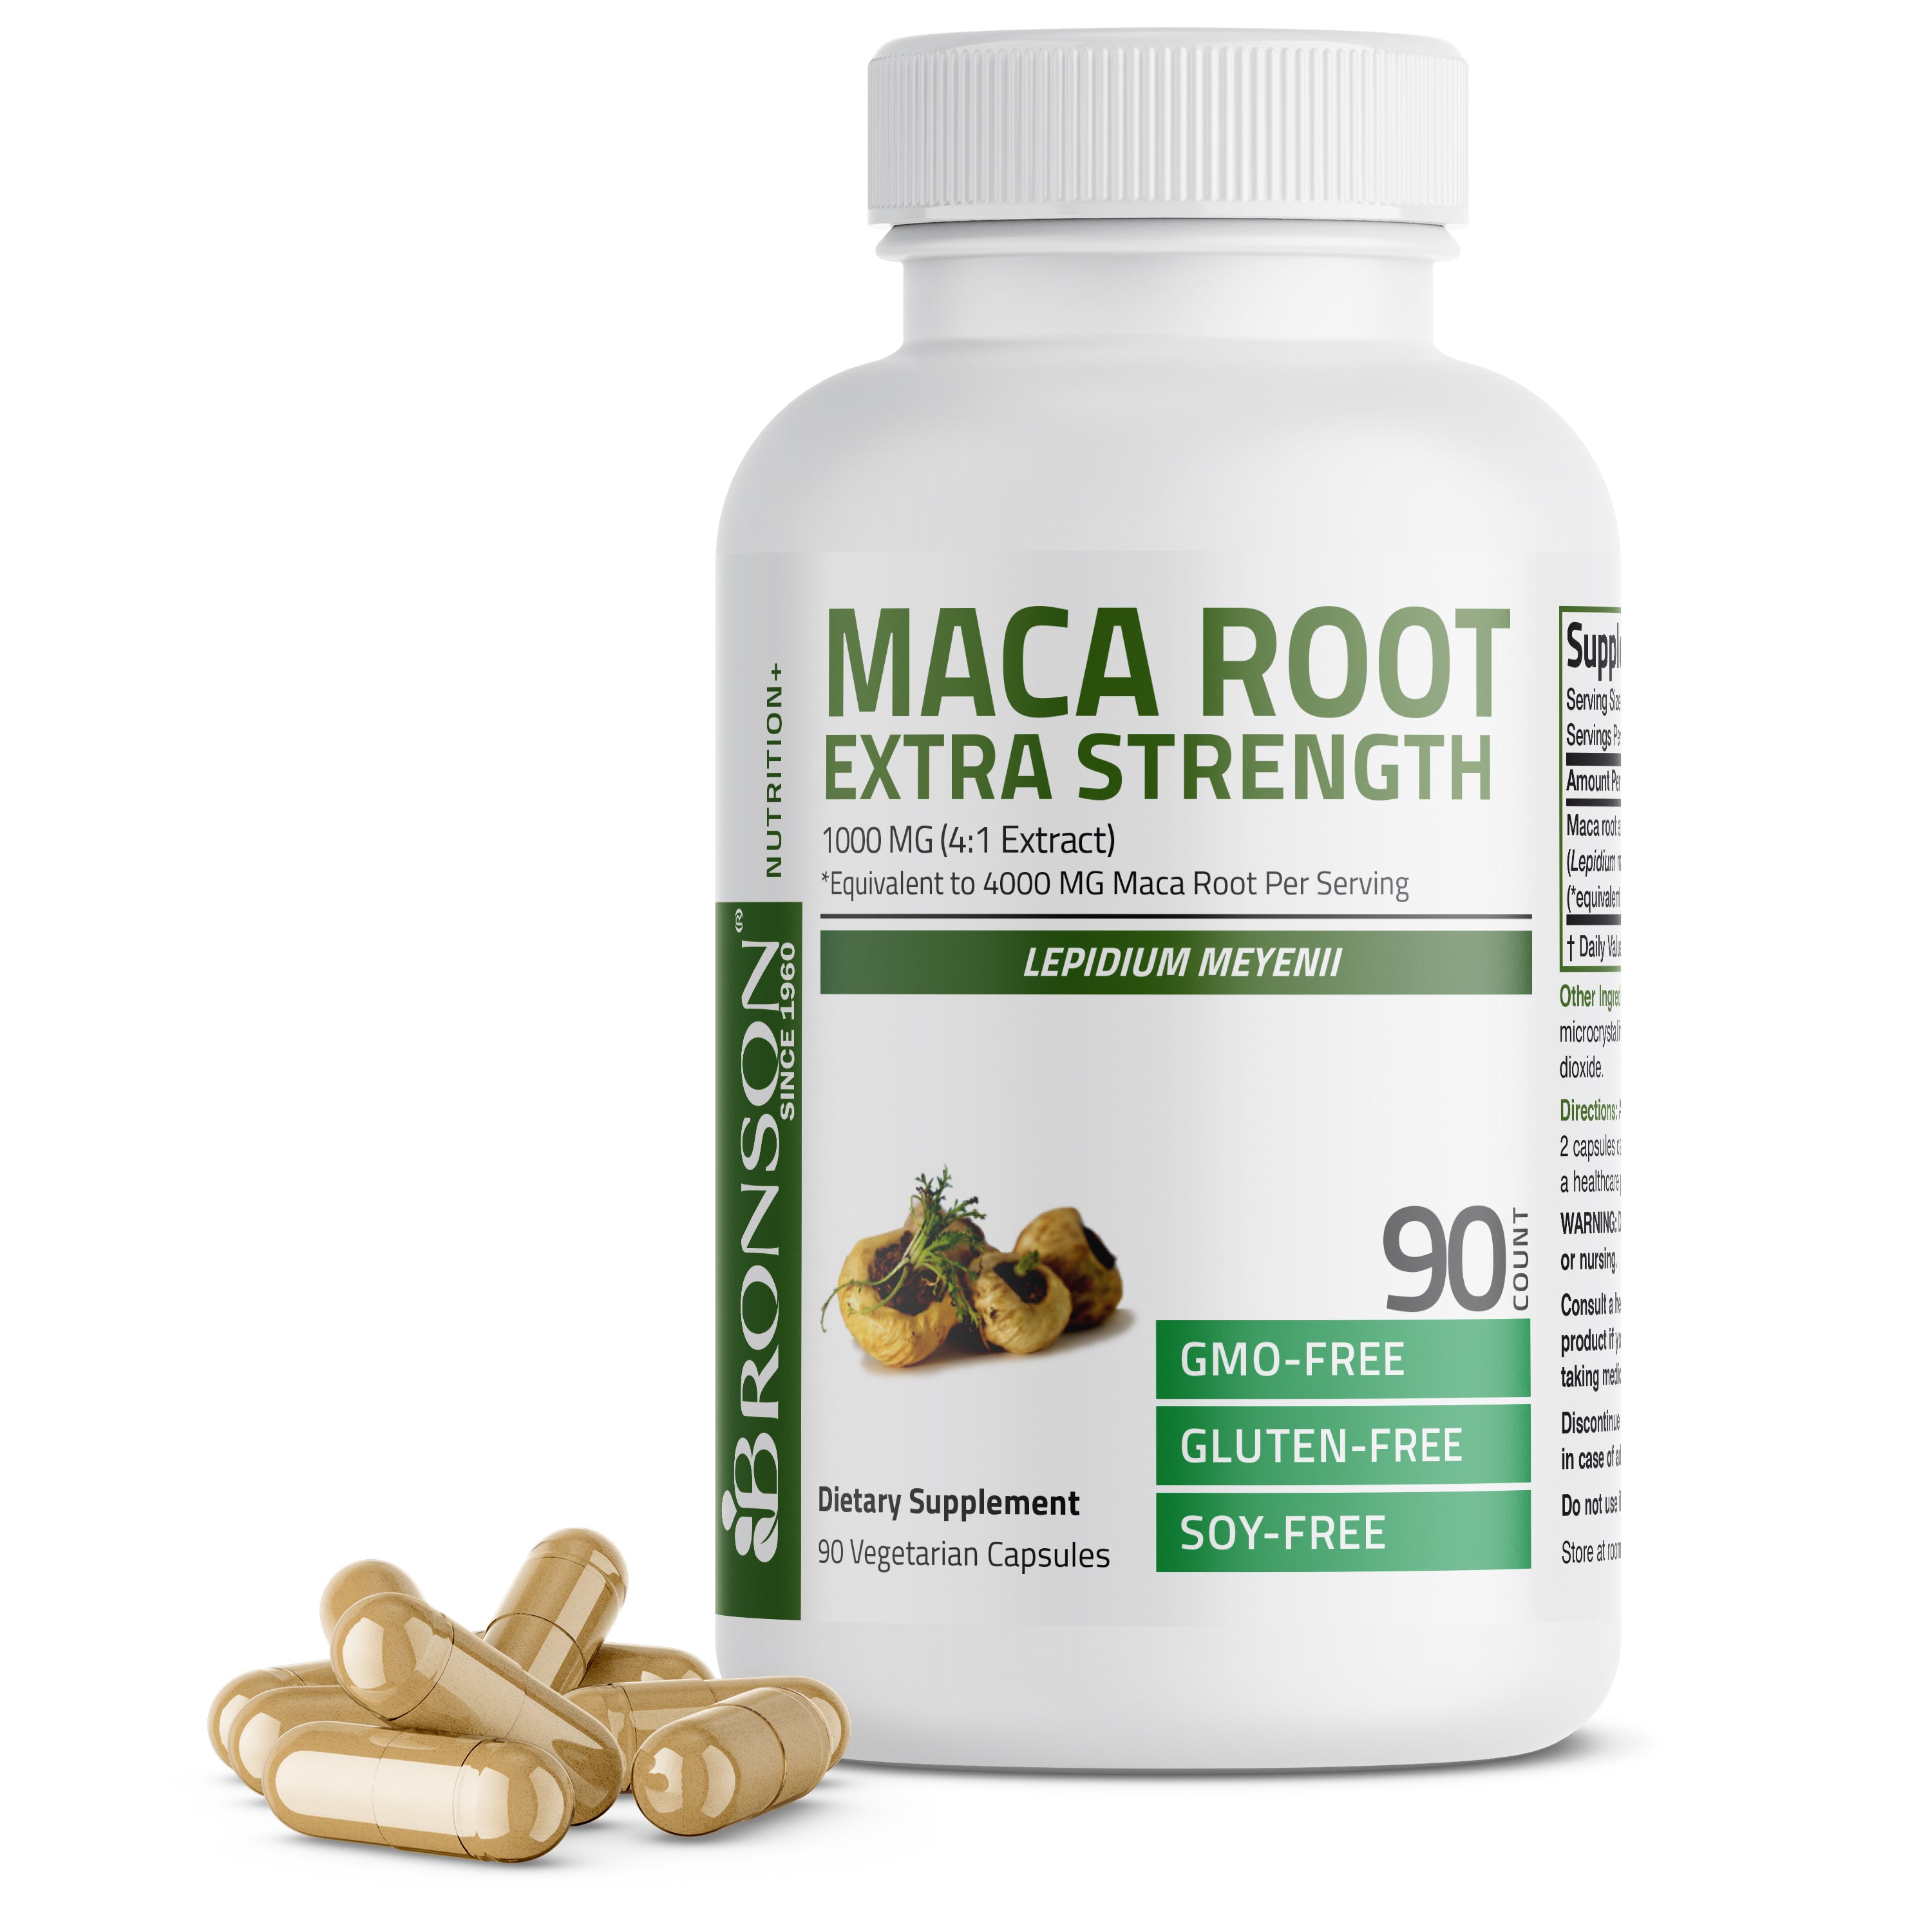 Maca Root Extra Strength 4000 MG per Serving view 7 of 6